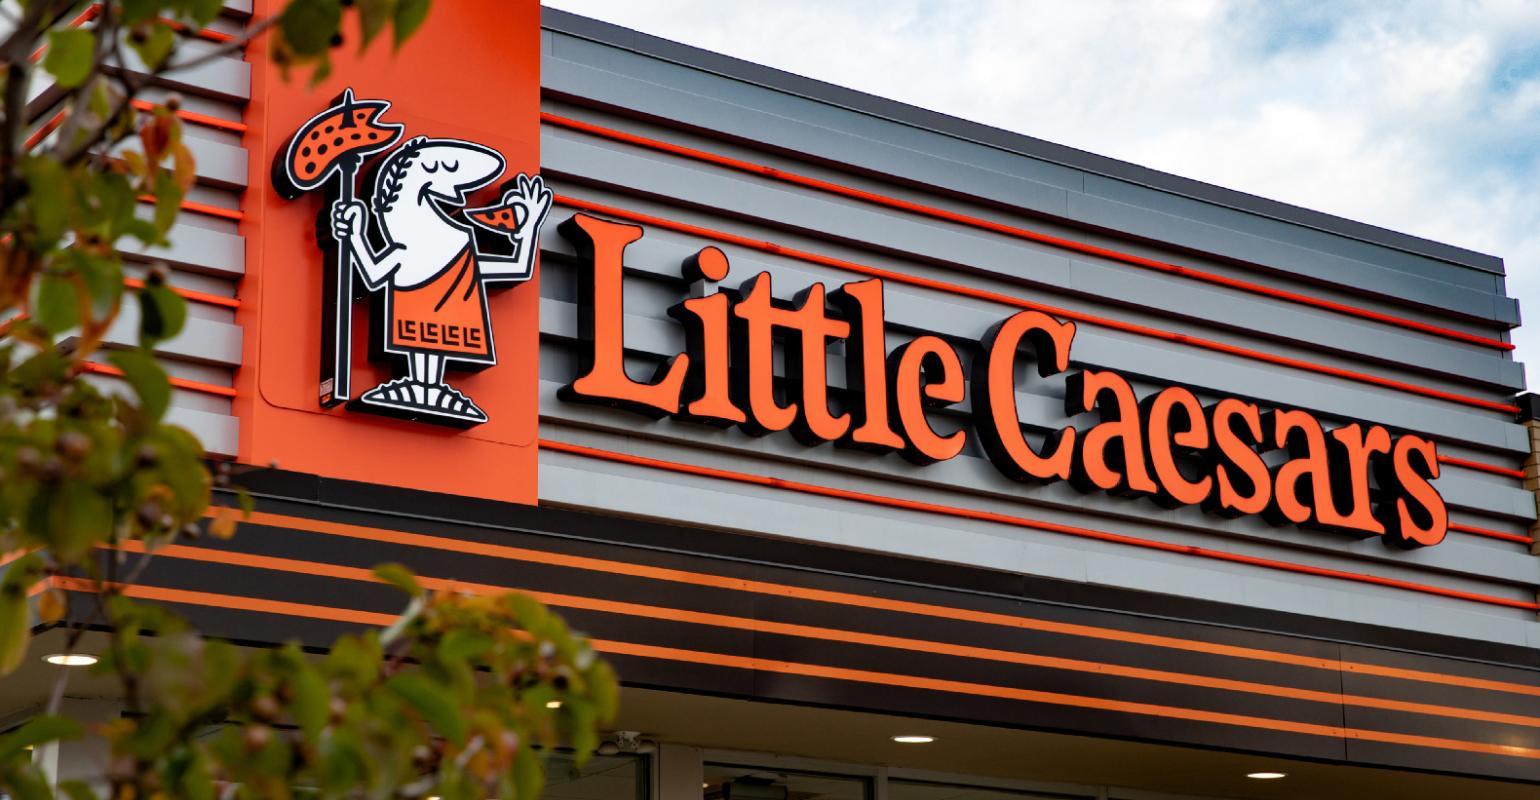 Three new technology executives have been announced by Little Caesars